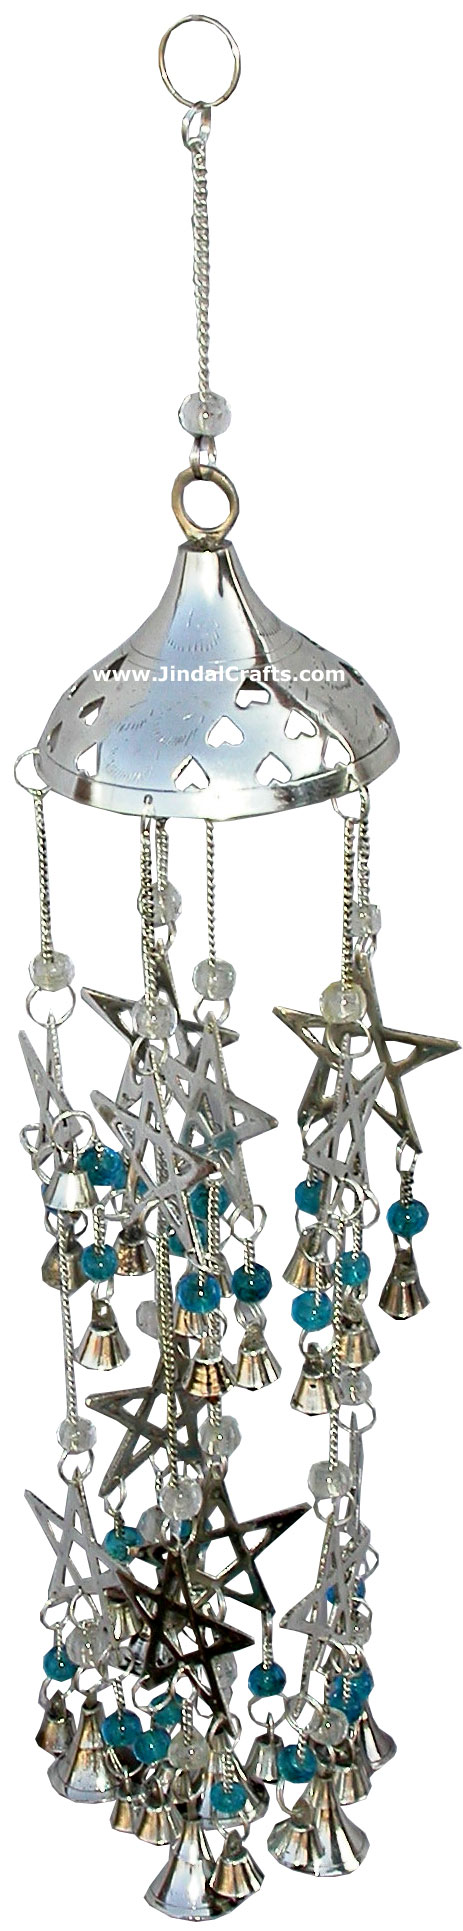 Wind Chimes Hanging Bells - Silver Plated Brass Beads Made Home Decoration India